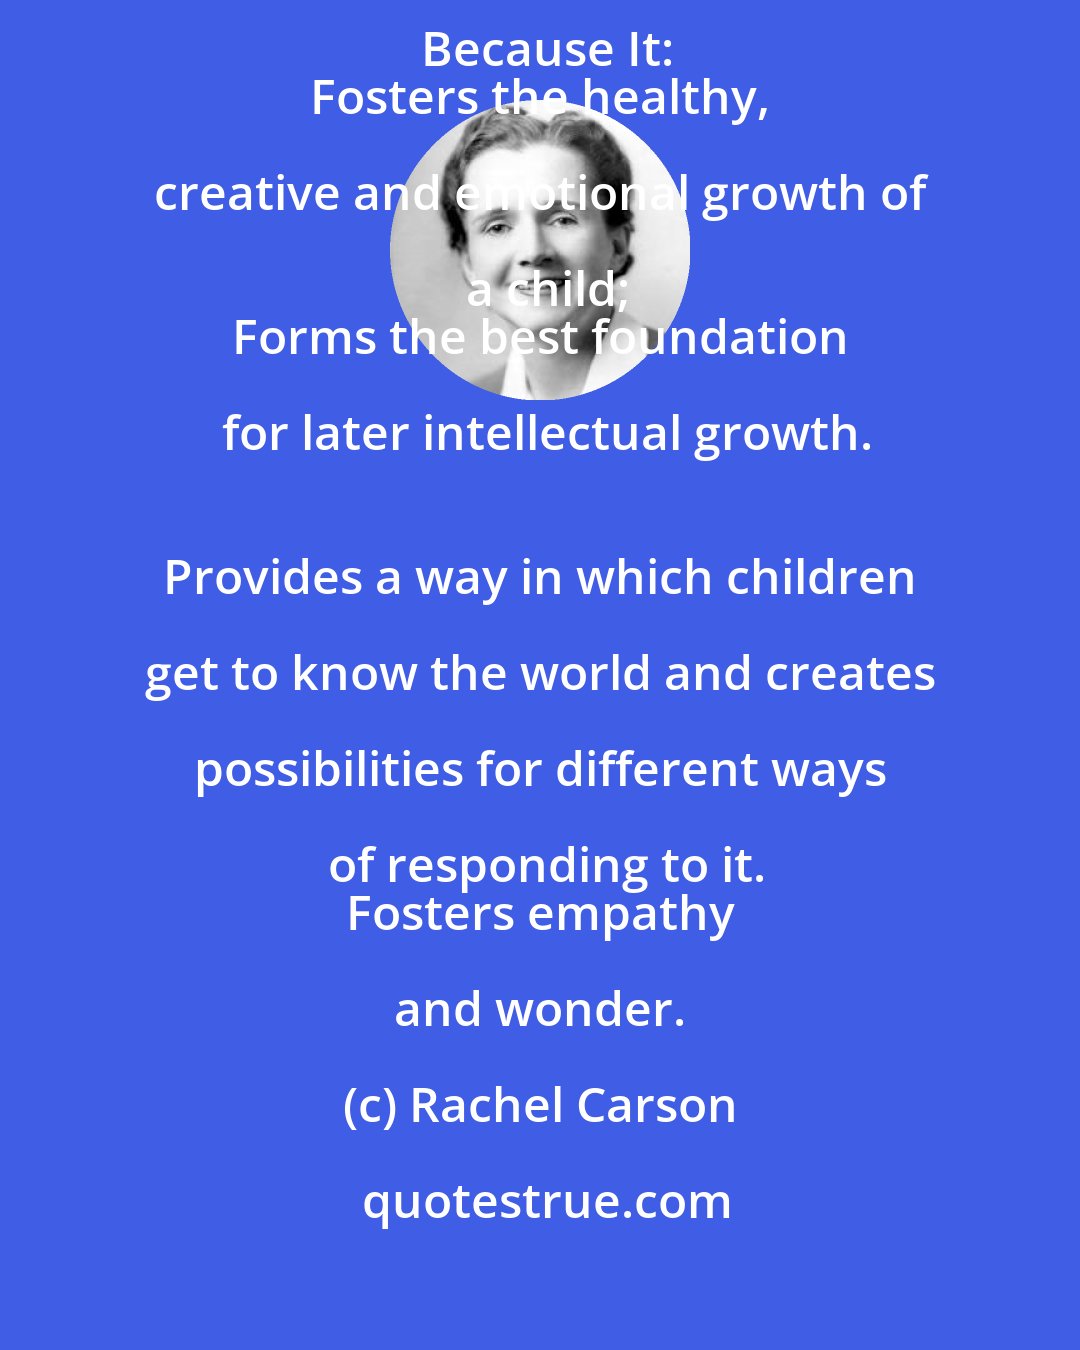 Rachel Carson: Play, Incorporating Animistic and Magical Thinking Is Important Because It:
 Fosters the healthy, creative and emotional growth of a child;
 Forms the best foundation for later intellectual growth.
 Provides a way in which children get to know the world and creates possibilities for different ways of responding to it.
 Fosters empathy and wonder.